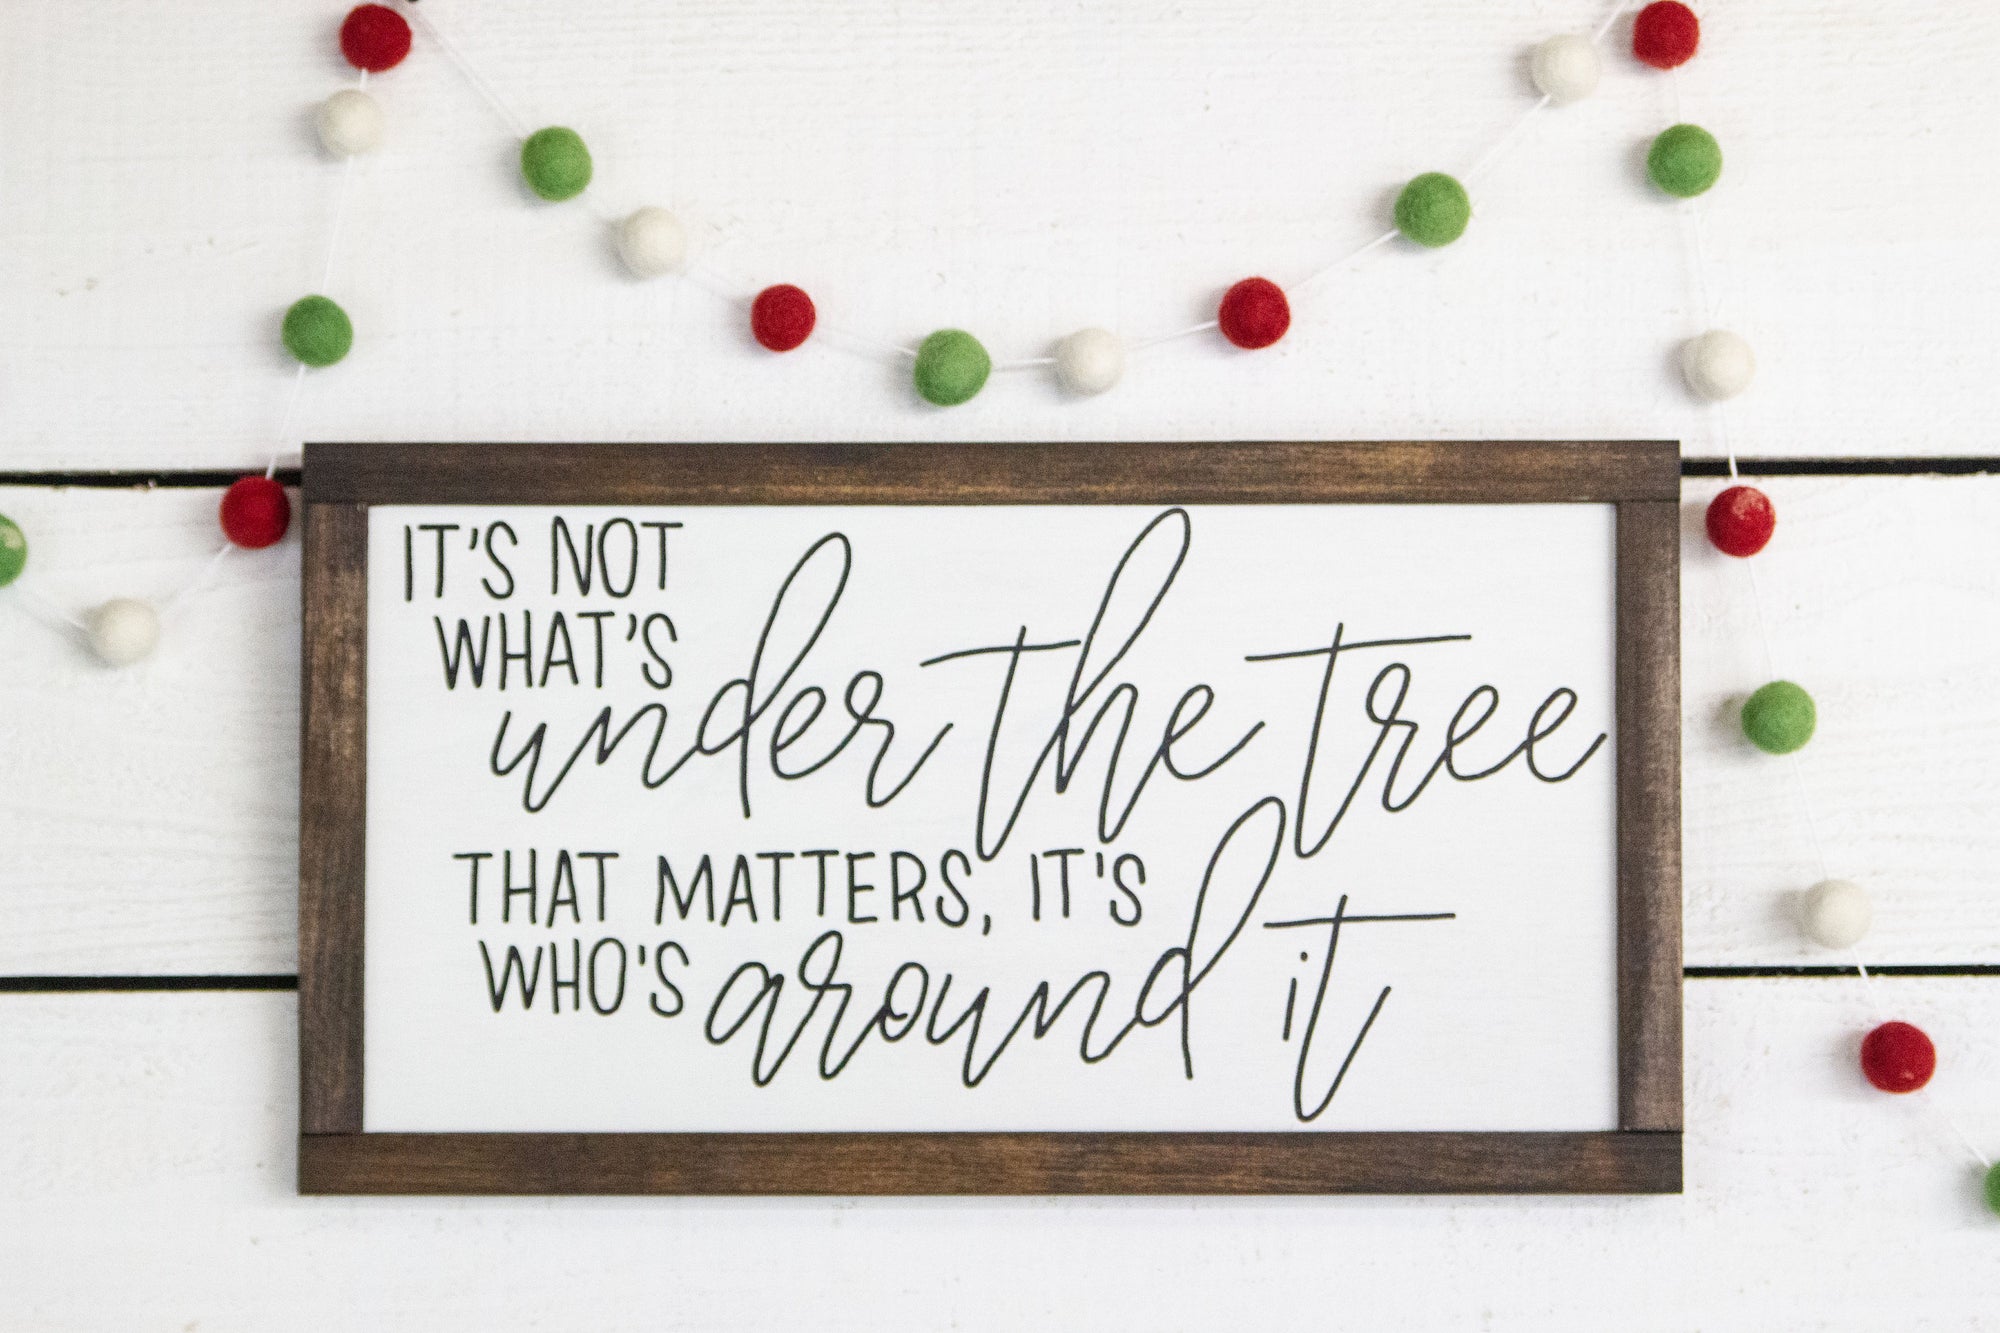 It's not what's under the tree that matters, it's who's around it